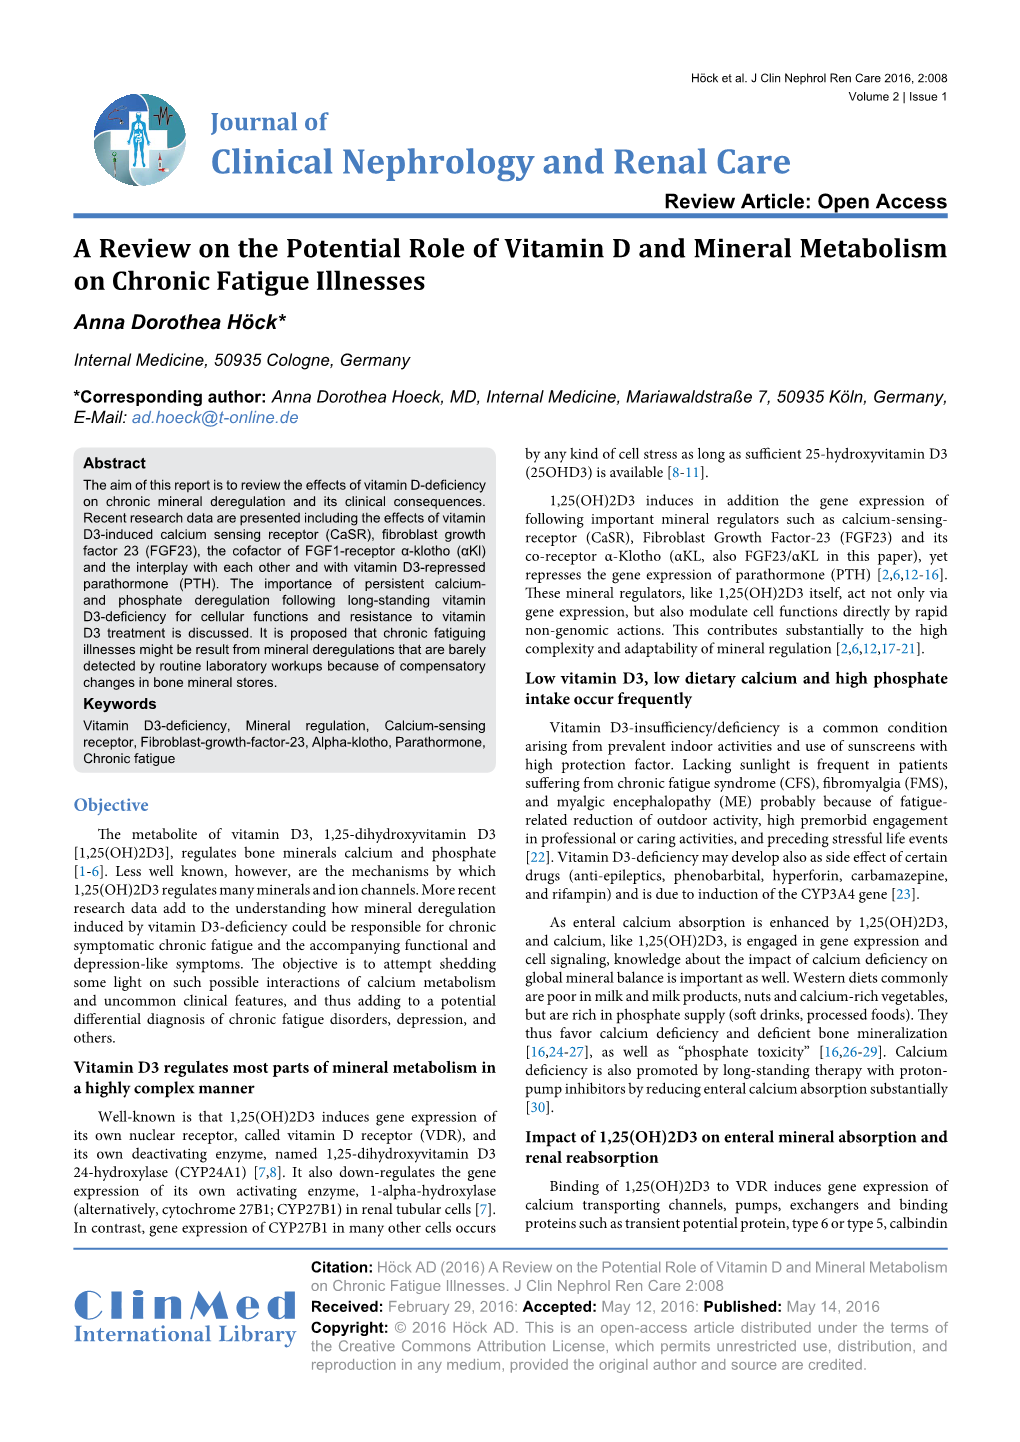 A Review on the Potential Role of Vitamin D and Mineral Metabolism on Chronic Fatigue Illnesses Anna Dorothea Höck*